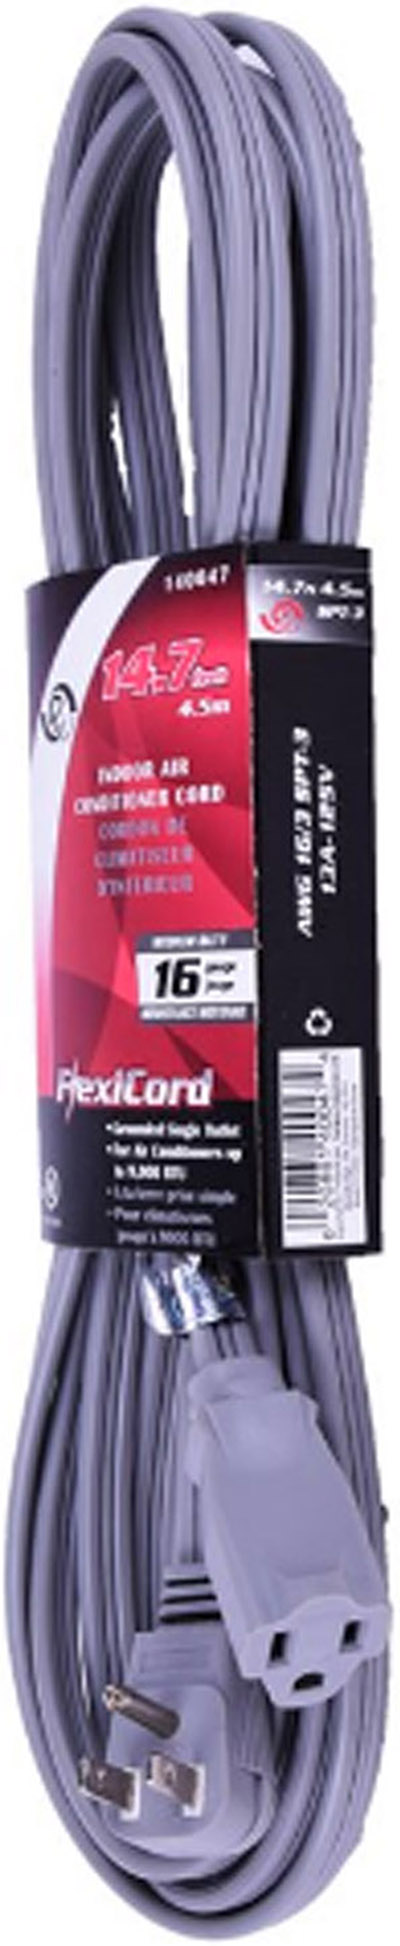 FlexiCord® 14.7 Ft Single-outlet Extension Cord